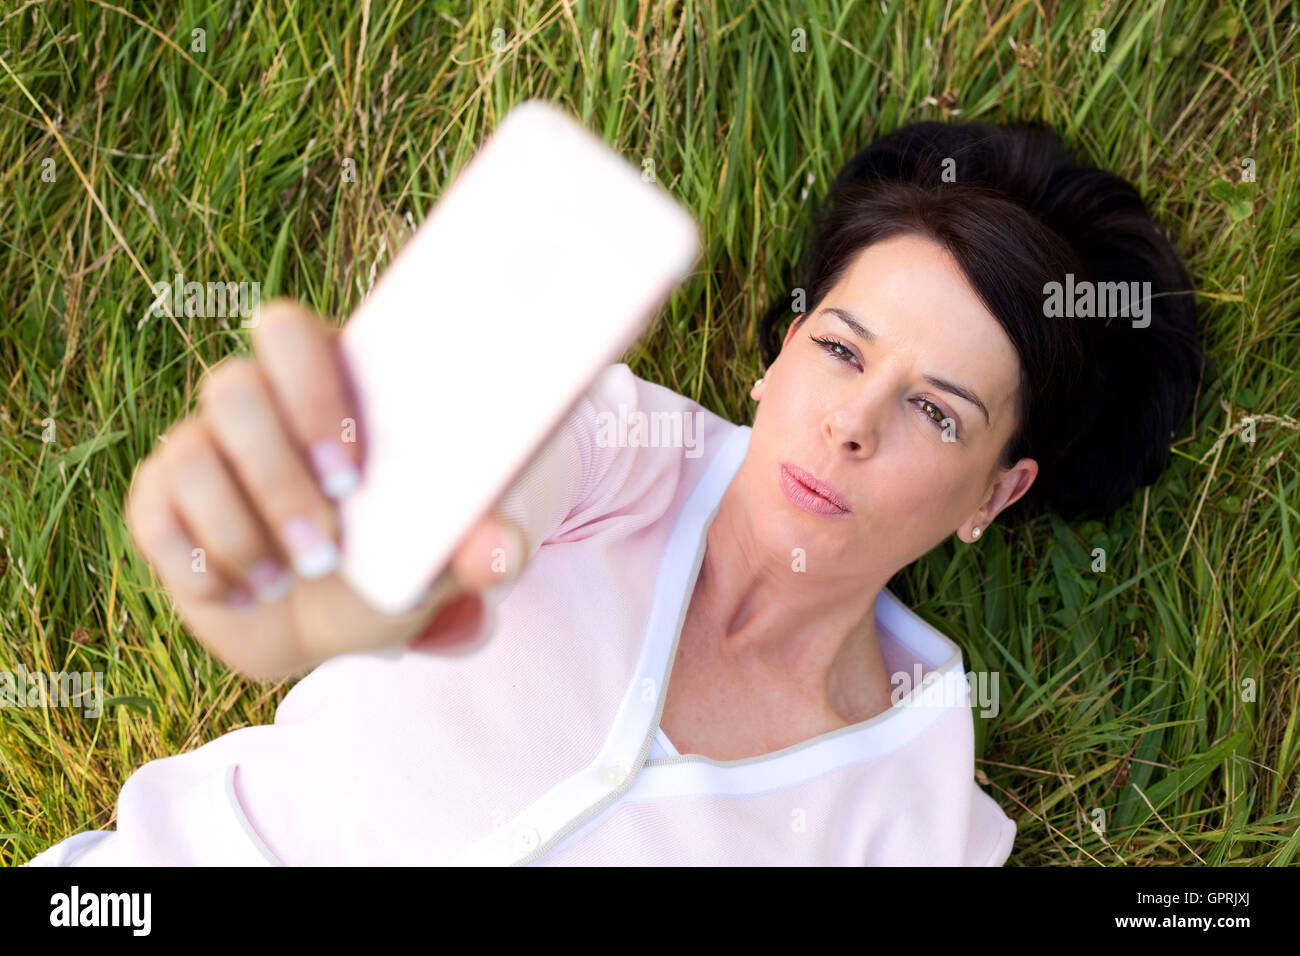 woman lying on the grass taking a selfie Stock Photo